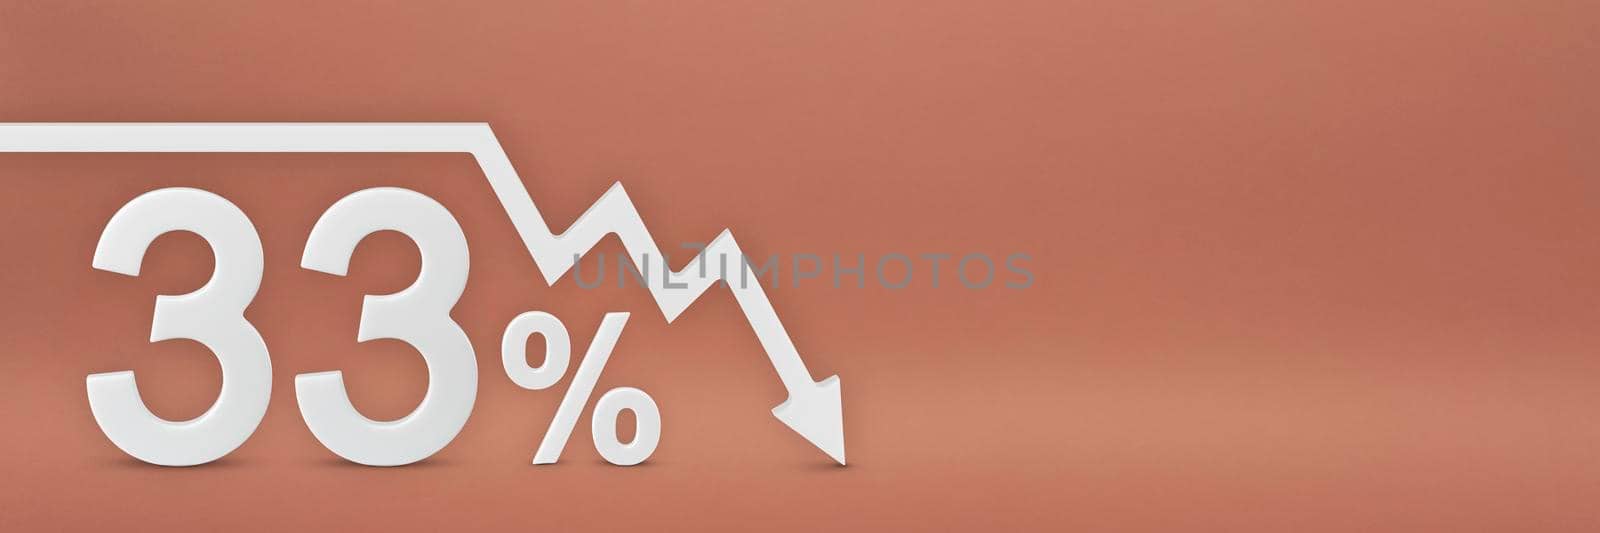 thirty-three percent, the arrow on the graph is pointing down. Stock market crash, bear market, inflation.Economic collapse, collapse of stocks.3d banner,33 percent discount sign on a red background. by SERSOL